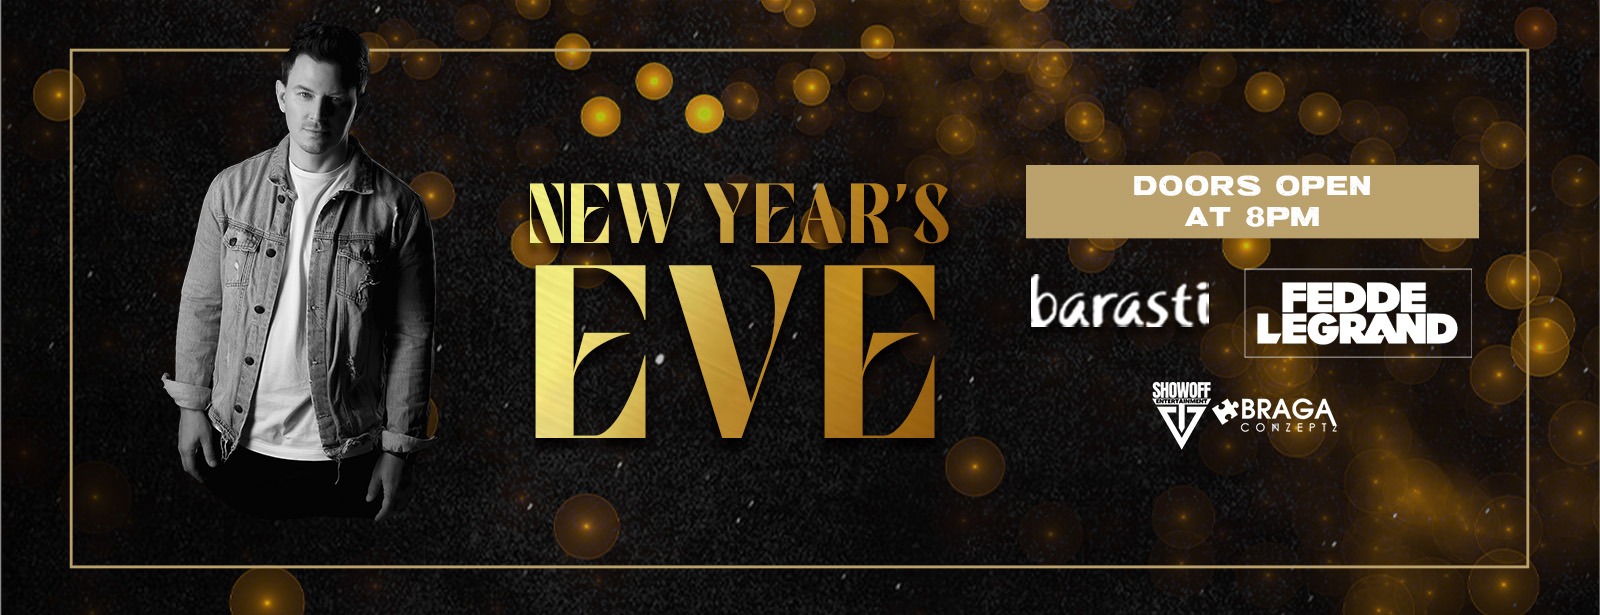 Barasti New Year’s Eve with Fedde Le Grand - Coming Soon in UAE